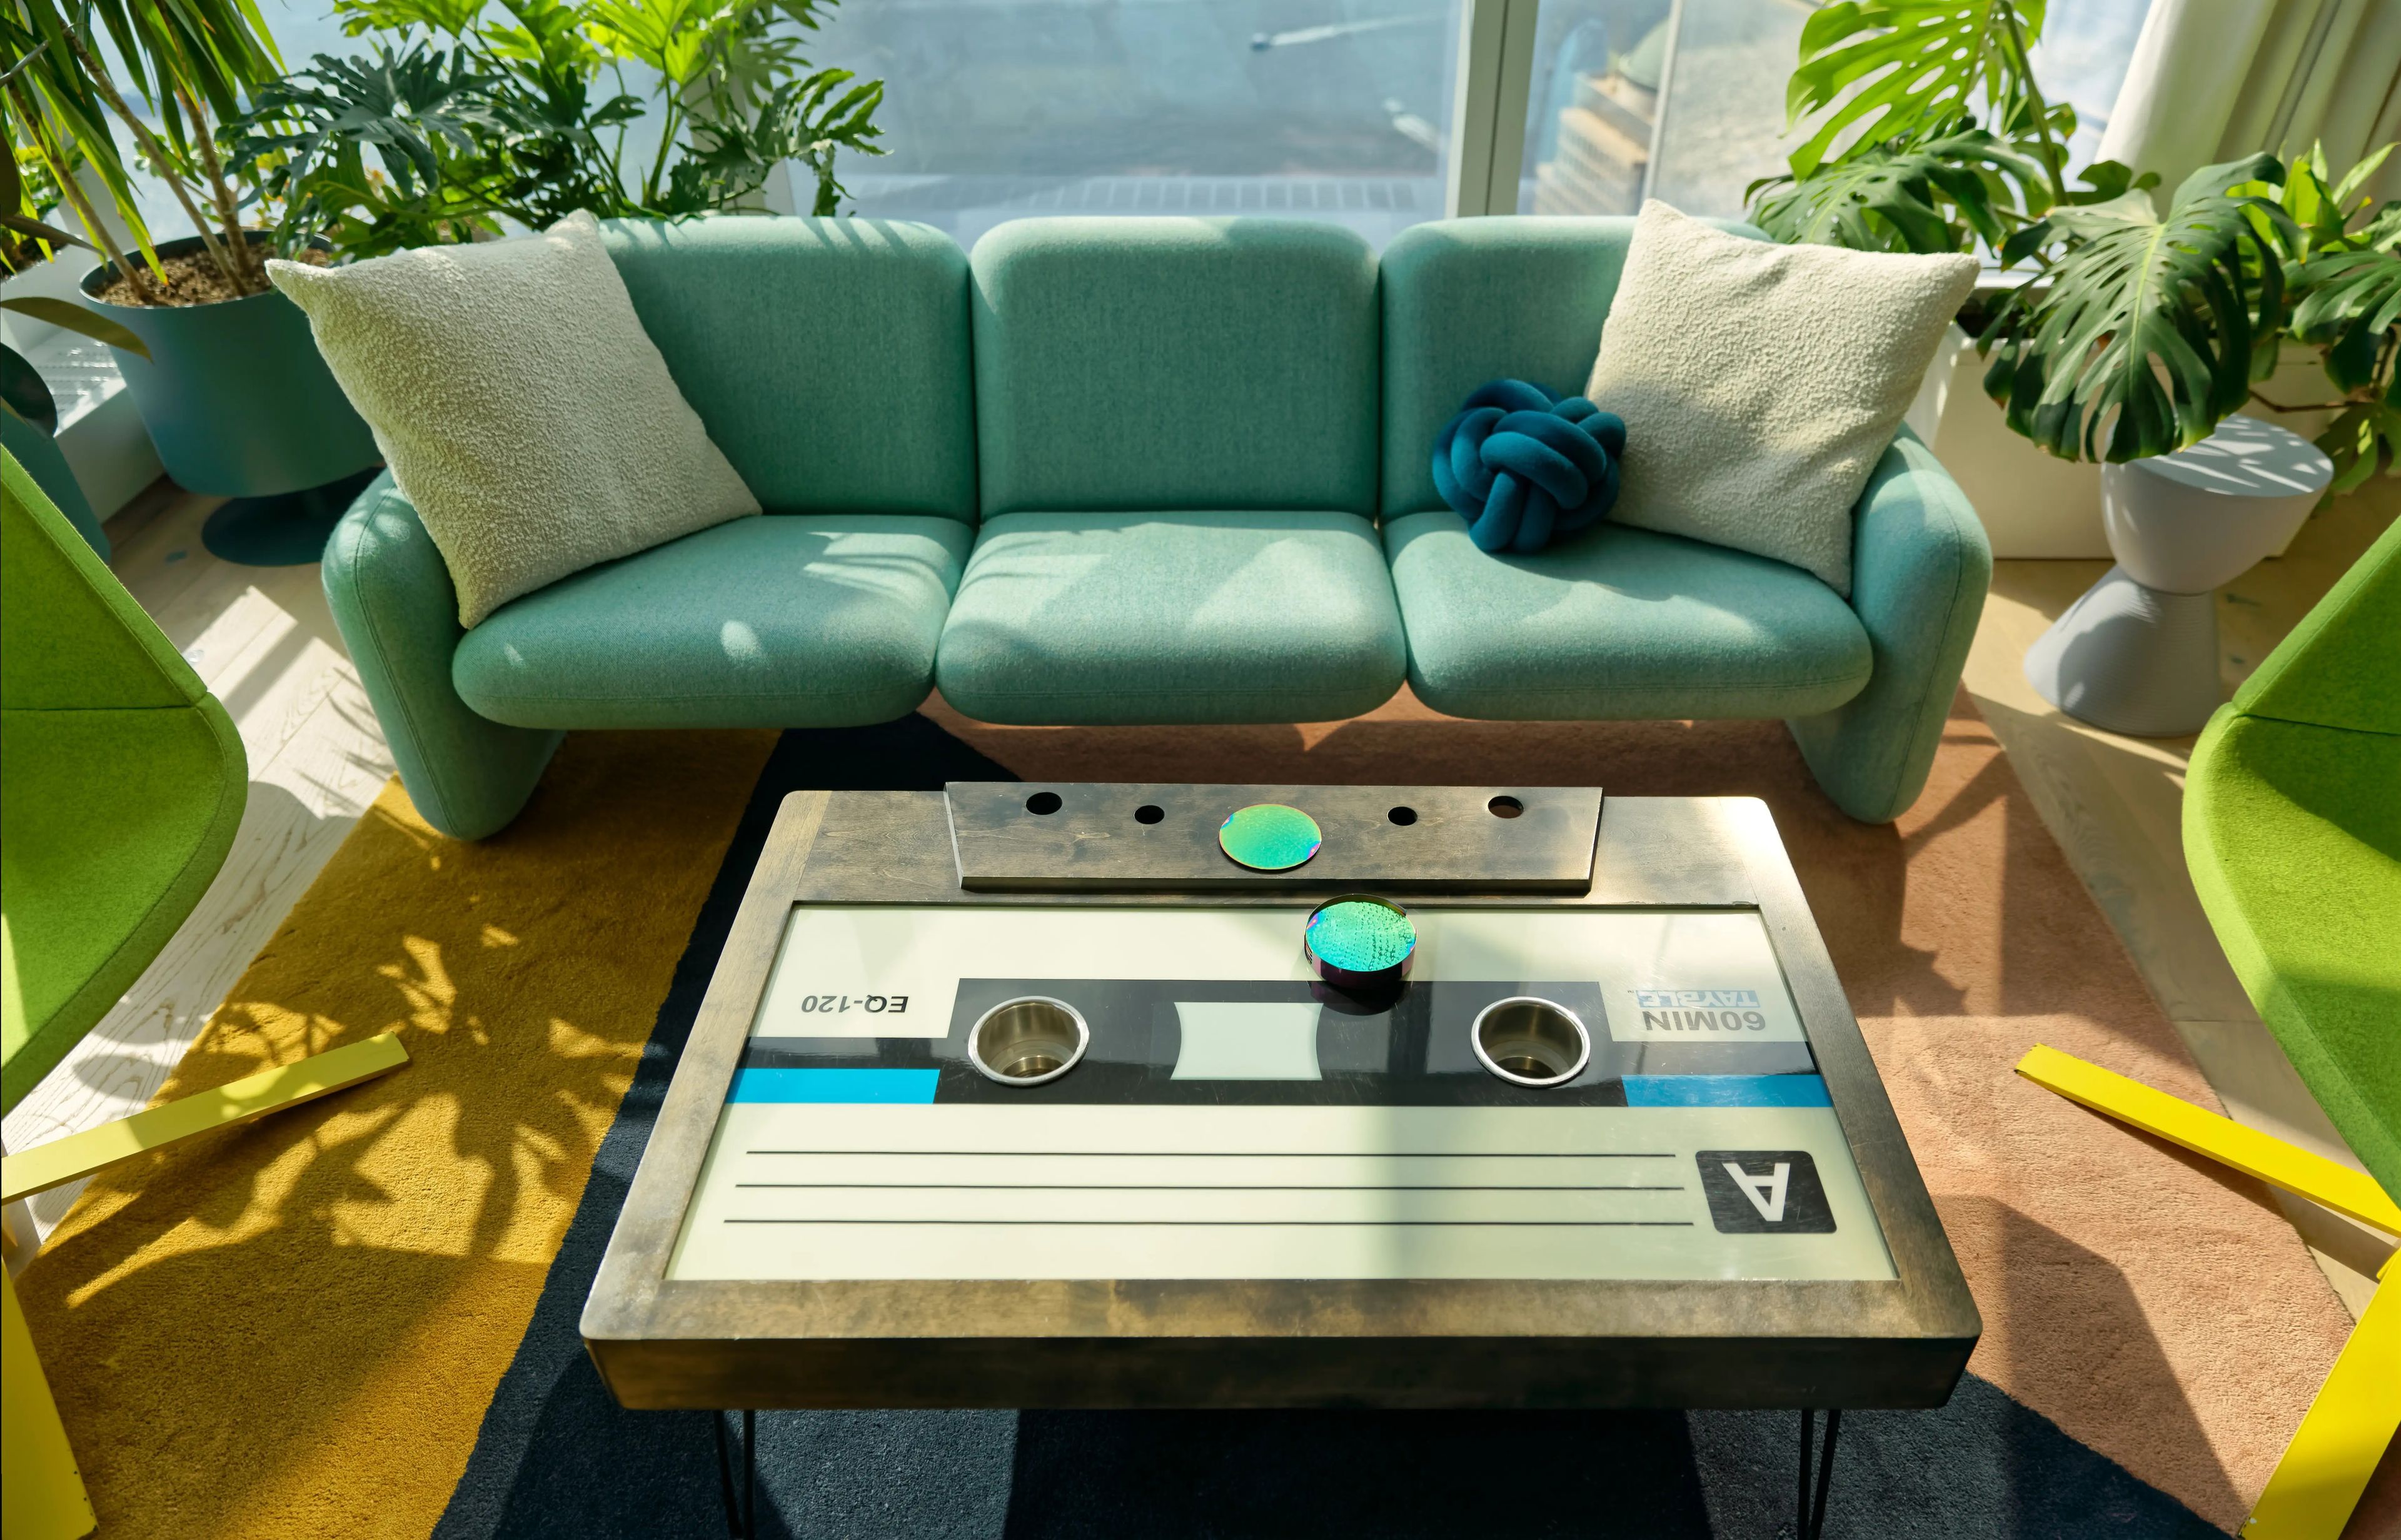 A green couch with a coffee table that is shaped and designed to look like a cassette tape. The room has a lot of natural light and a few plants in it.